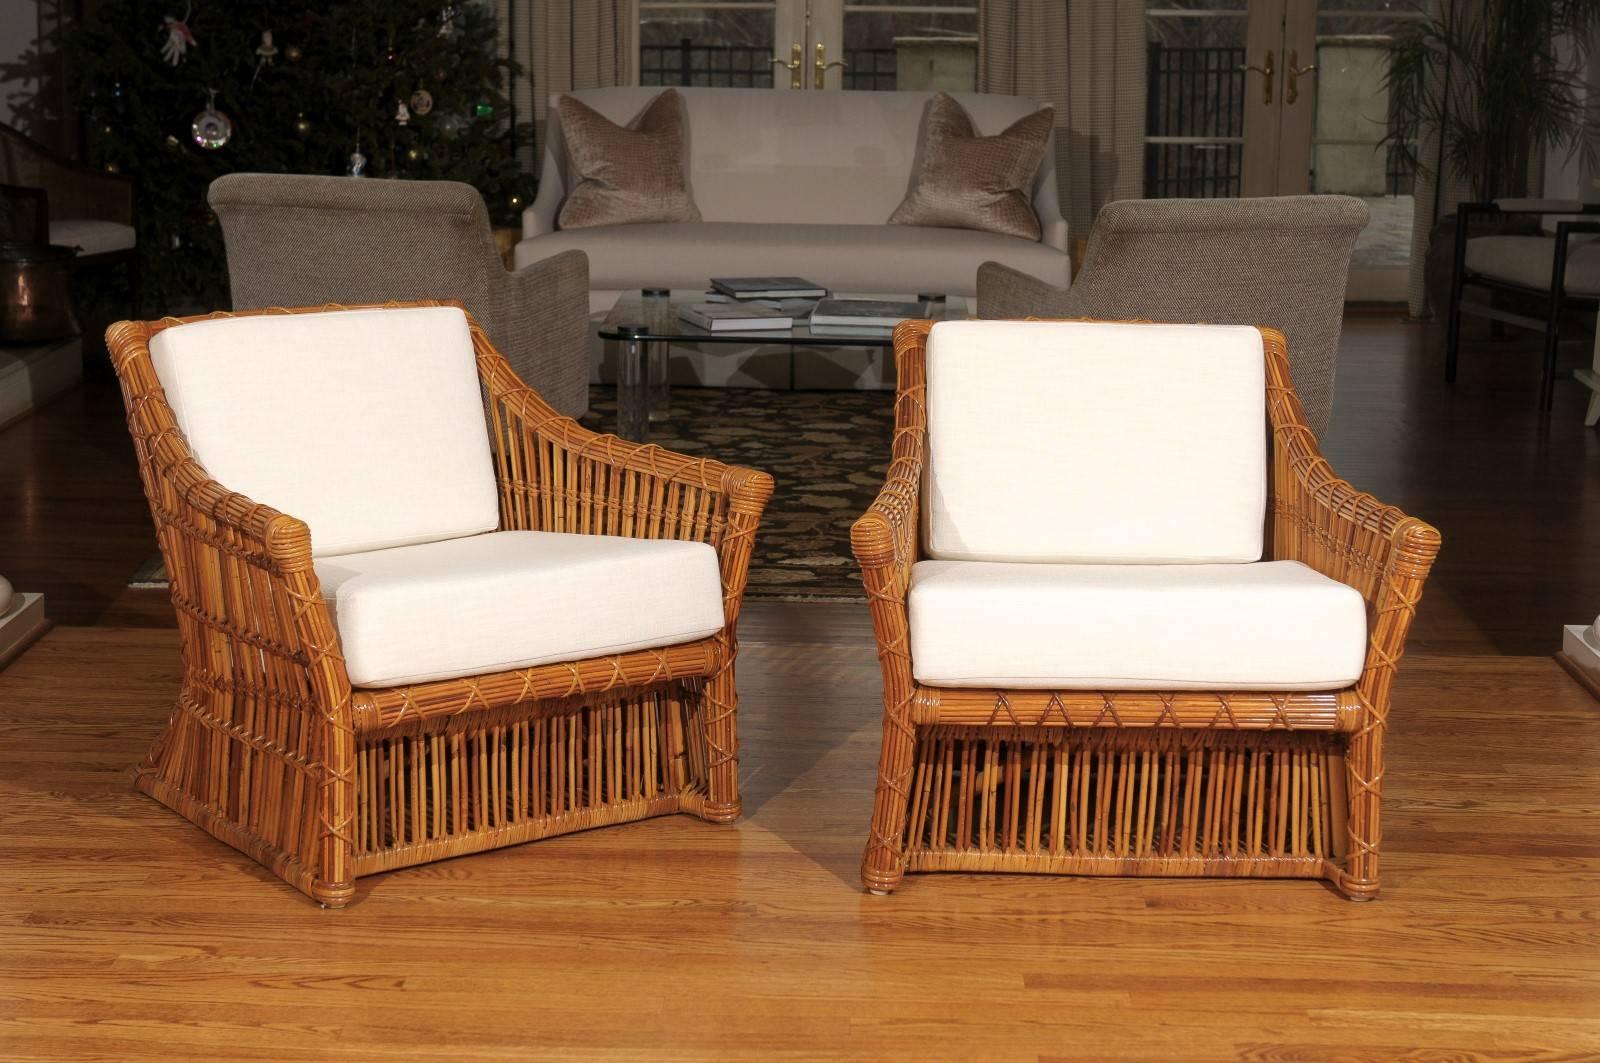 These magnificent lounge chairs are shipped as professionally photographed and described in the listing narrative: Meticulously professionally restored and installation ready. New custom upholstery in a stunning Larsen fabric. Expert custom